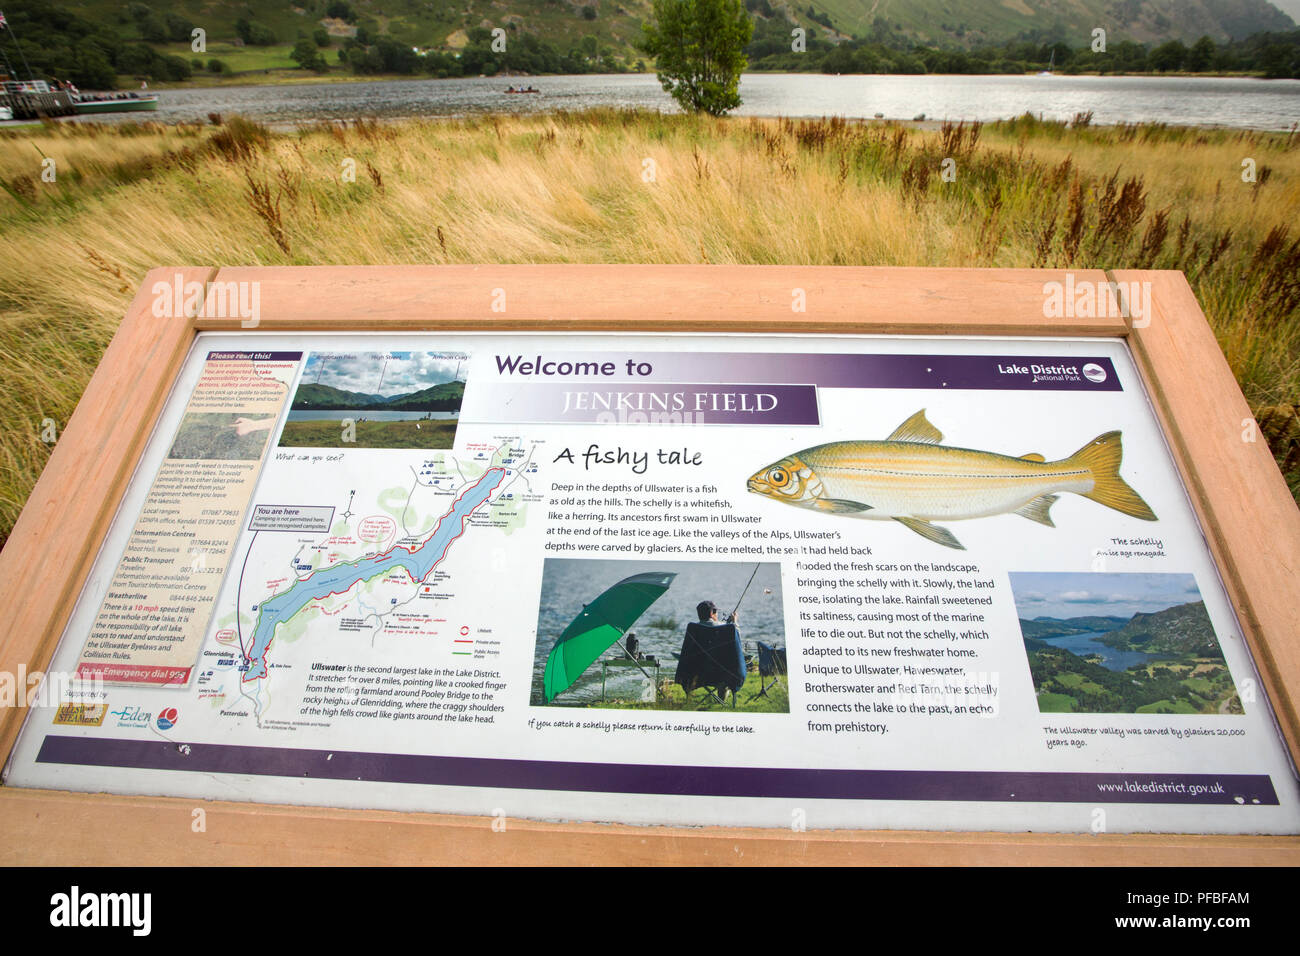 A sign about Schelly, Coregonus stigmaticus in Ullswater, Lake District, UK. Stock Photo